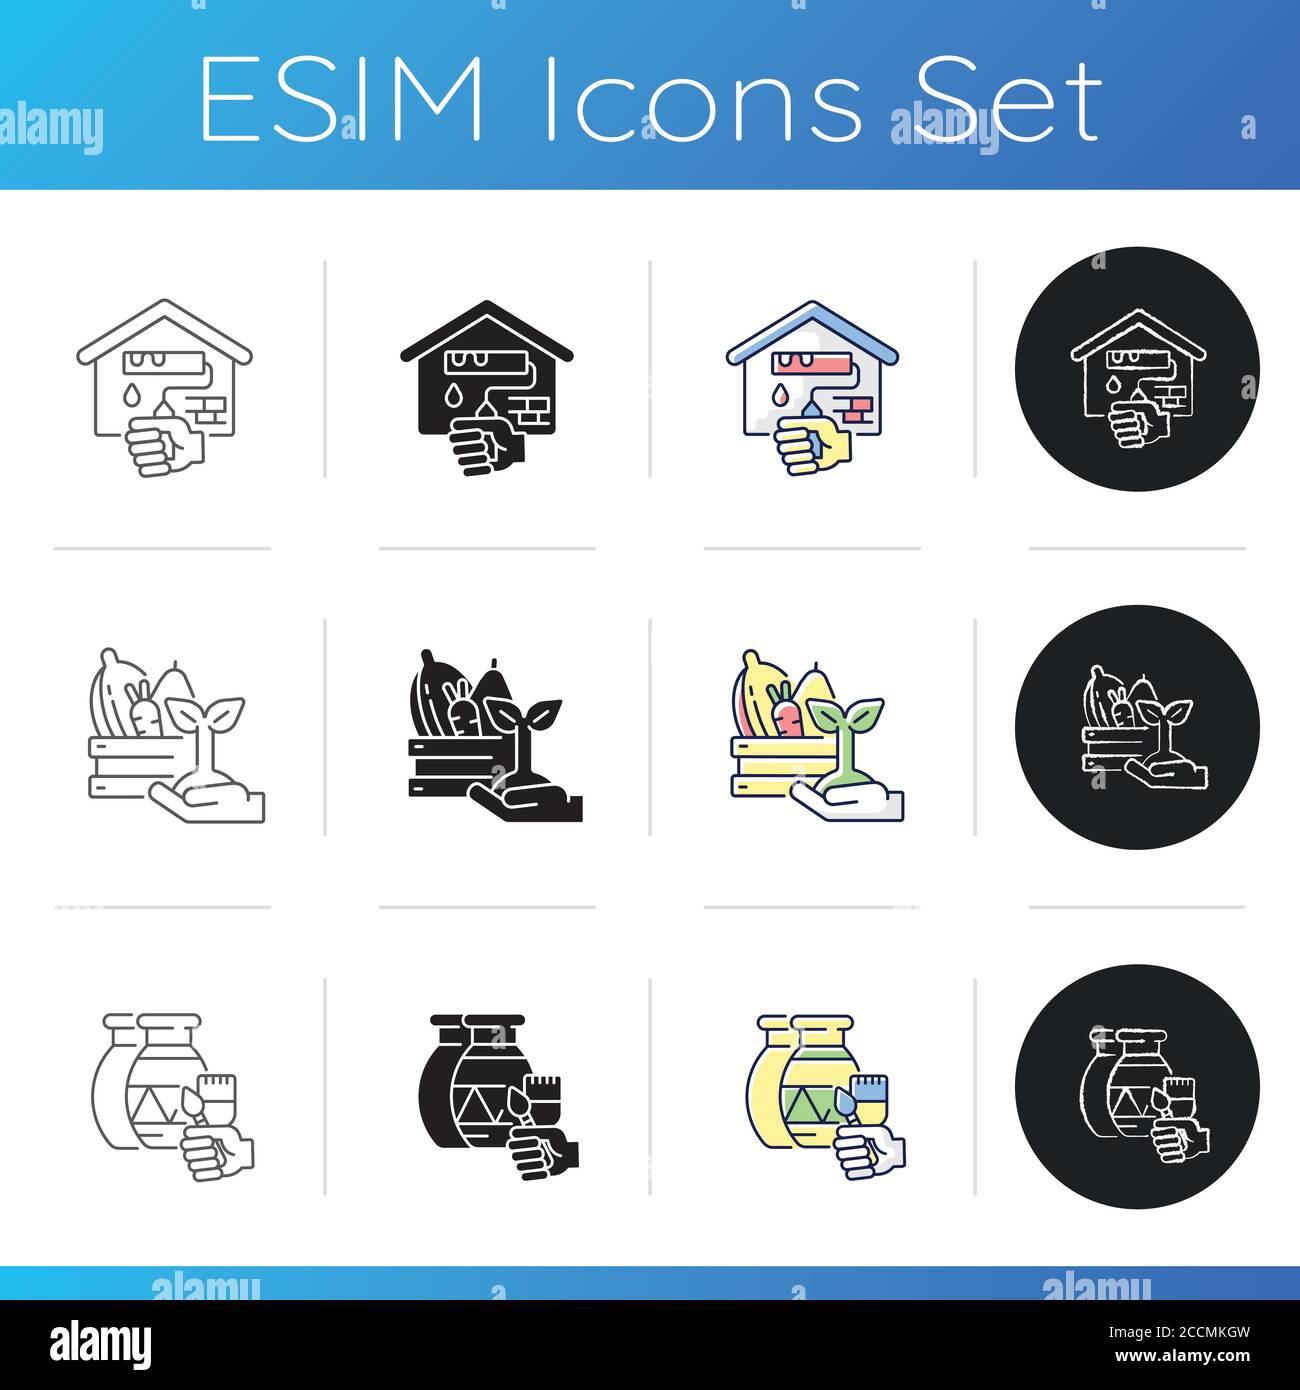 DIY project icons set Stock Vector